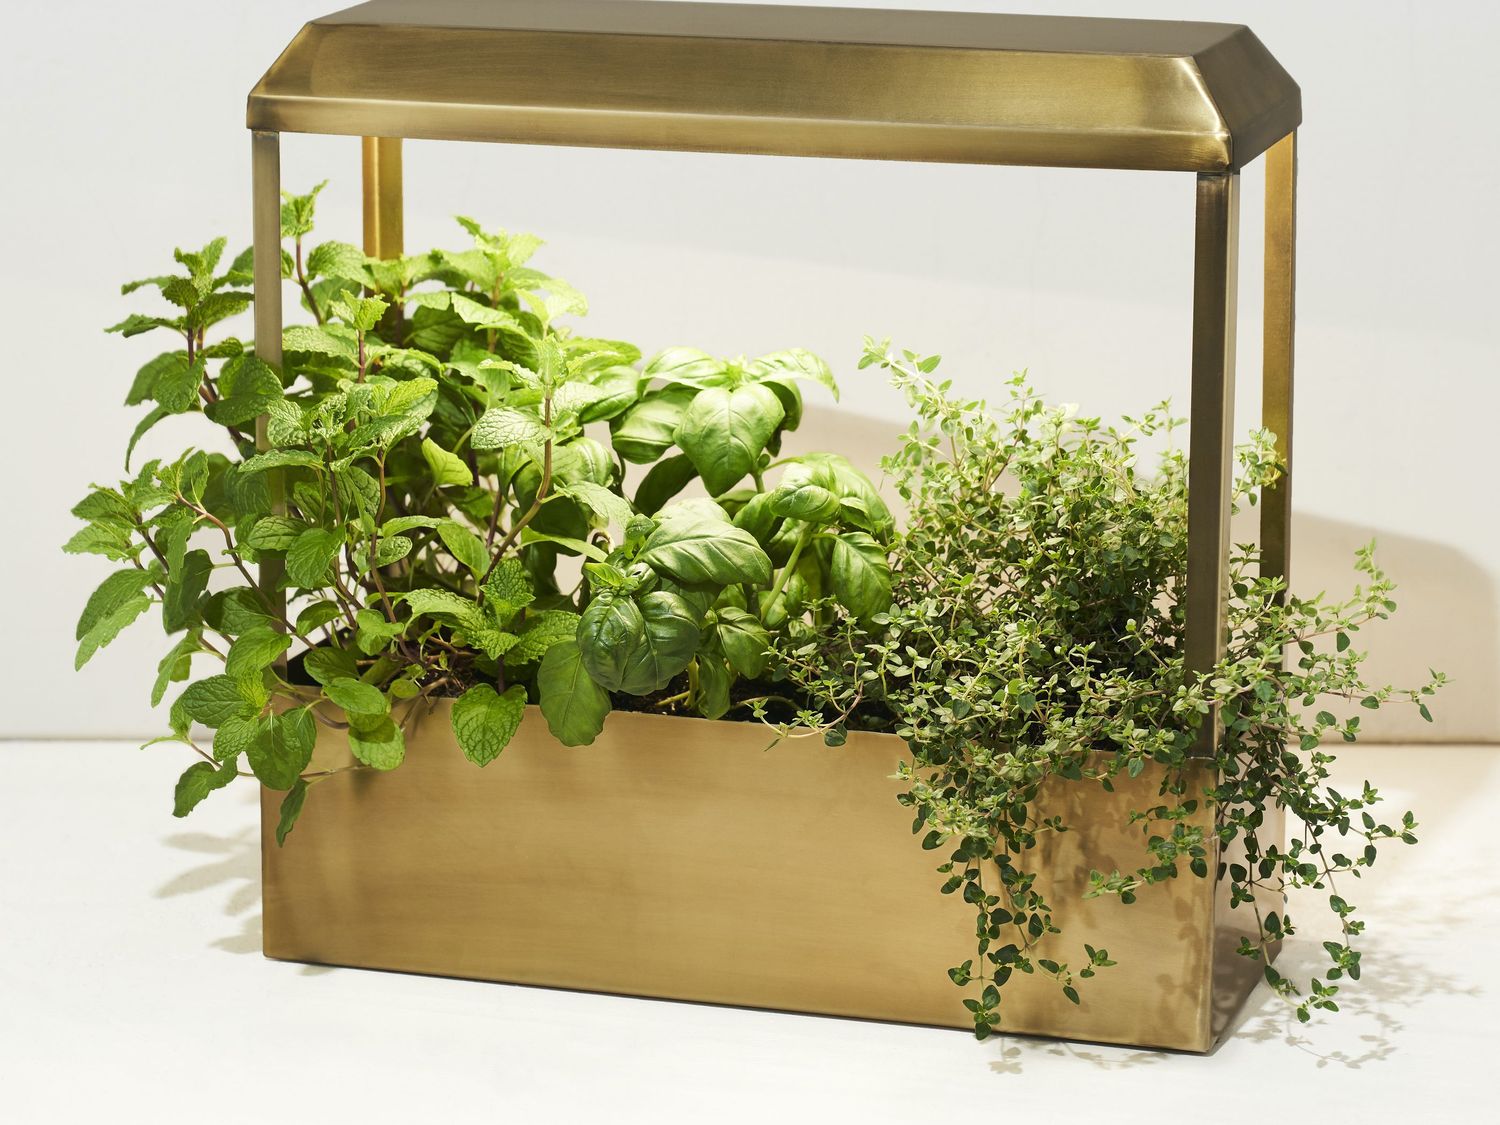 Modern Sprout Growhouse for on Includes LED Plants, Food52 Light Indoor